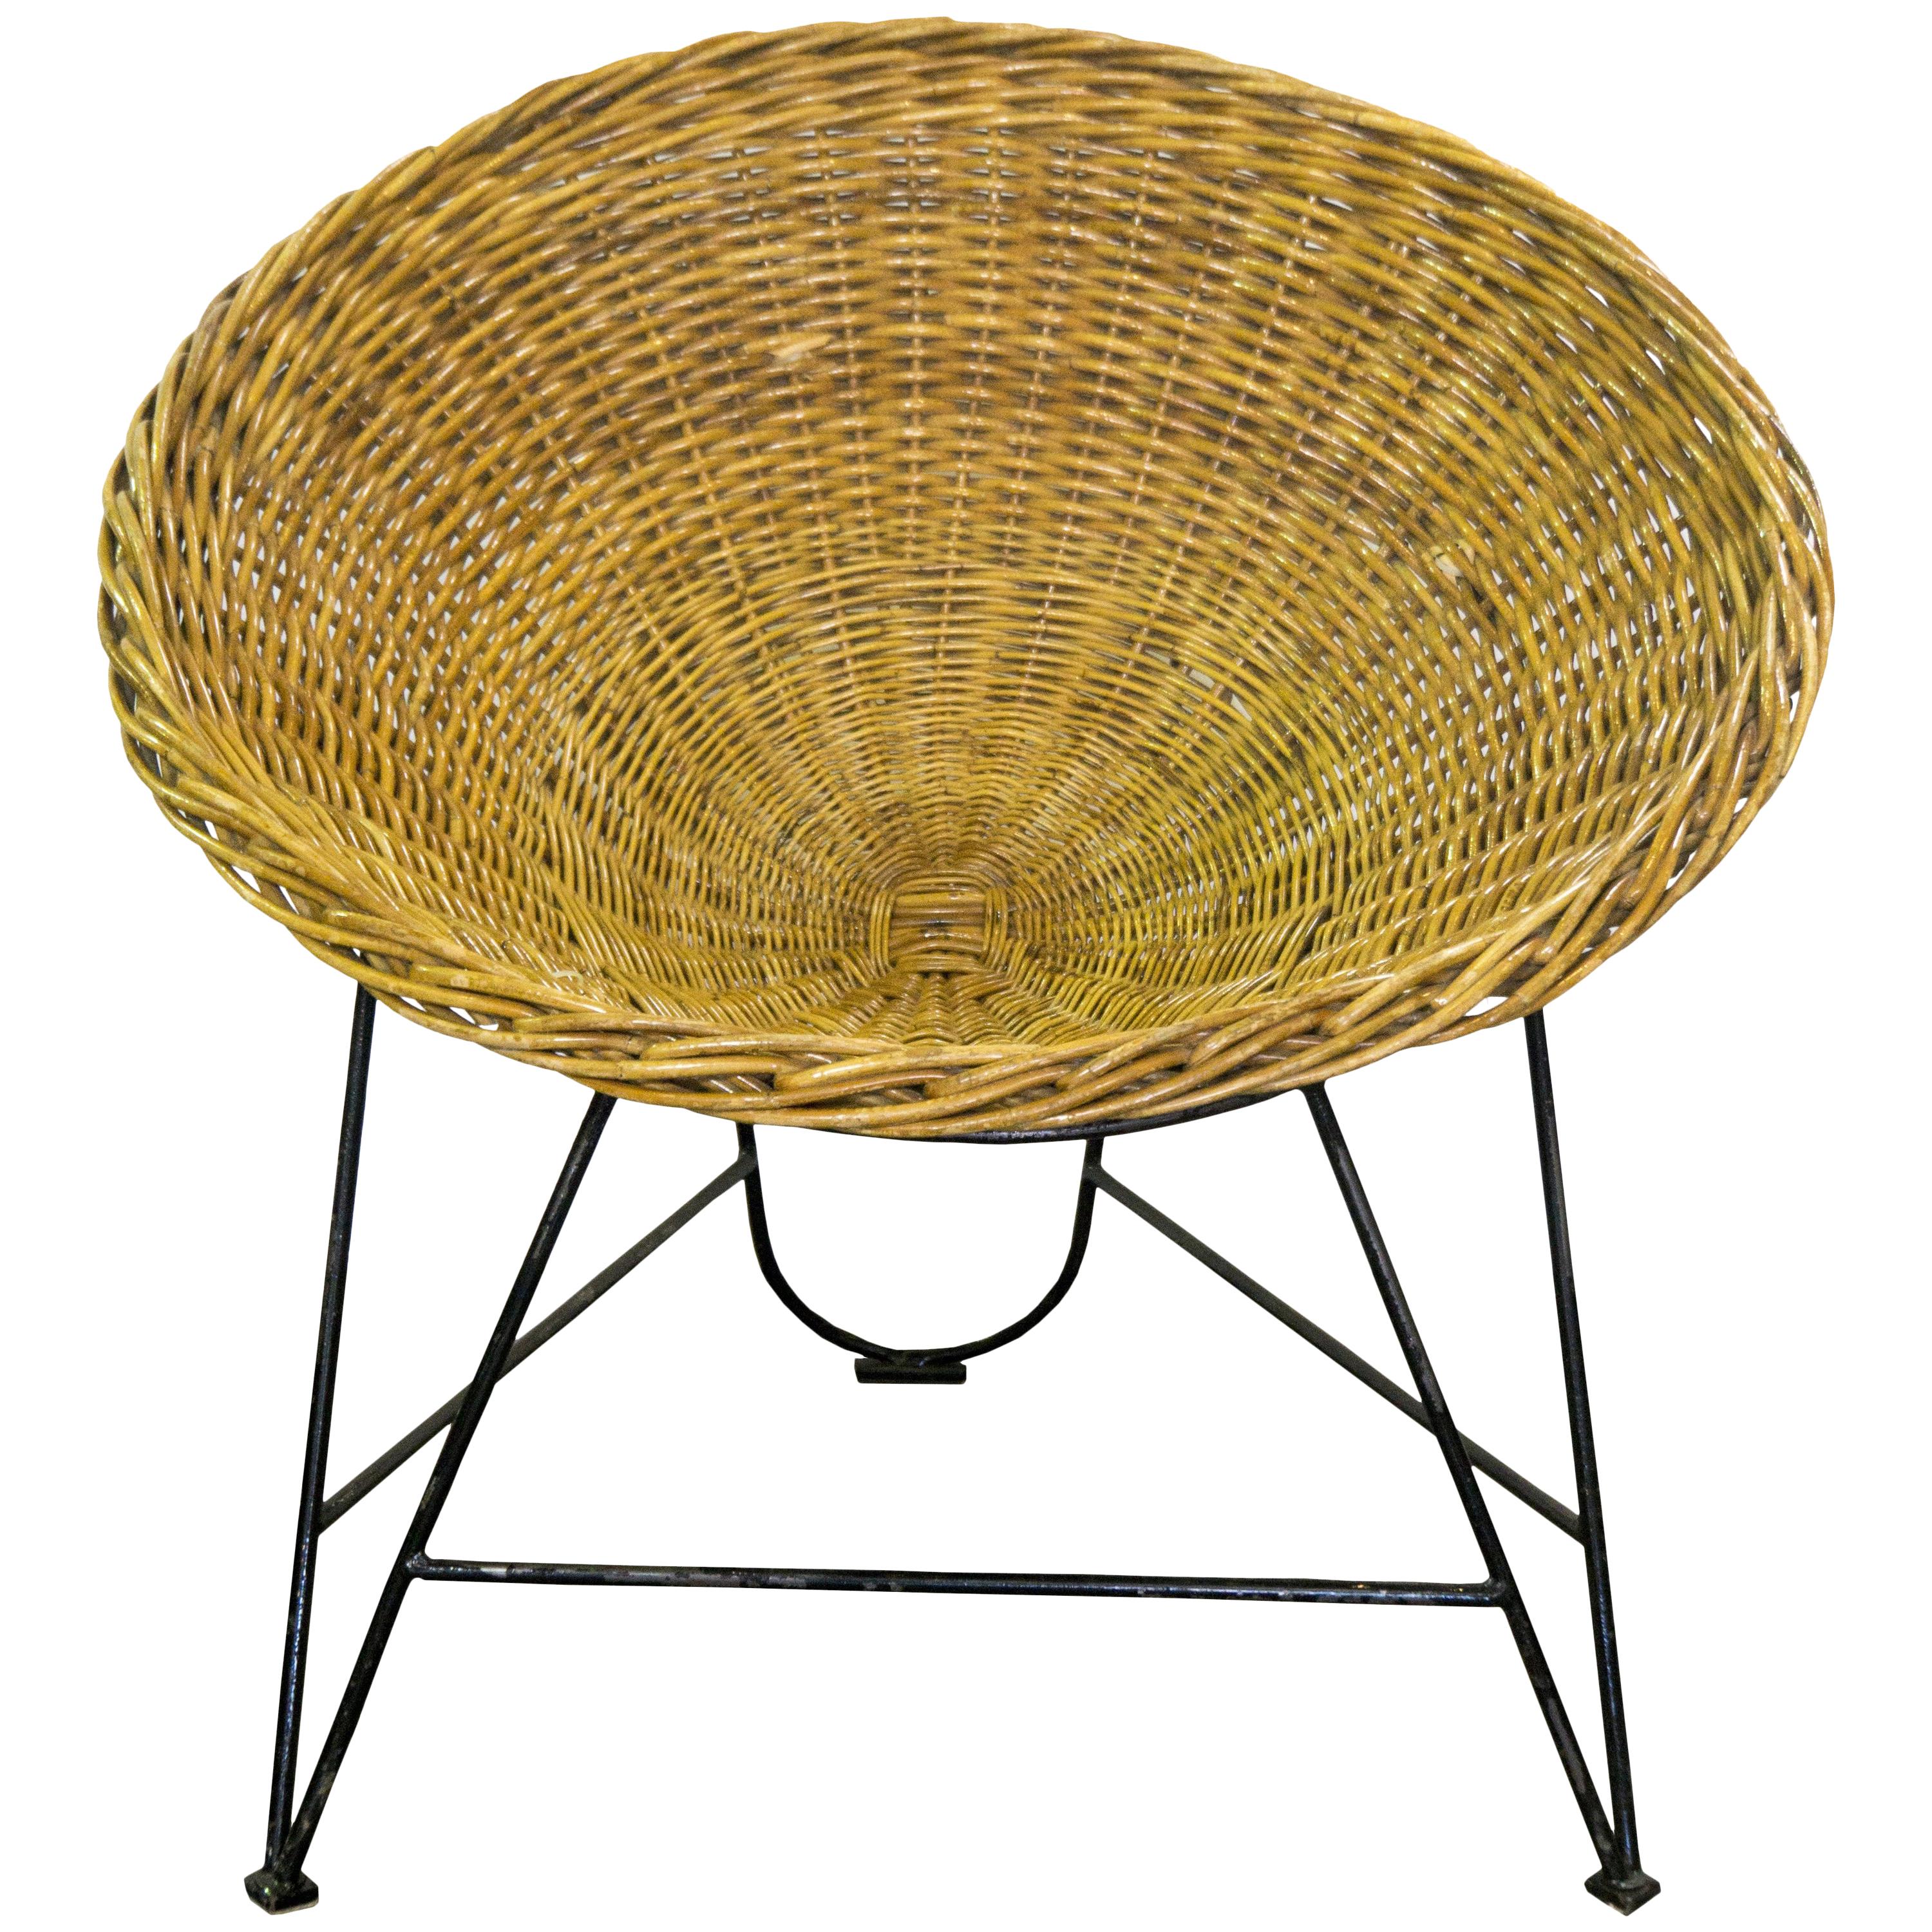 Midcentury French Wicker Chair on Iron Stand For Sale